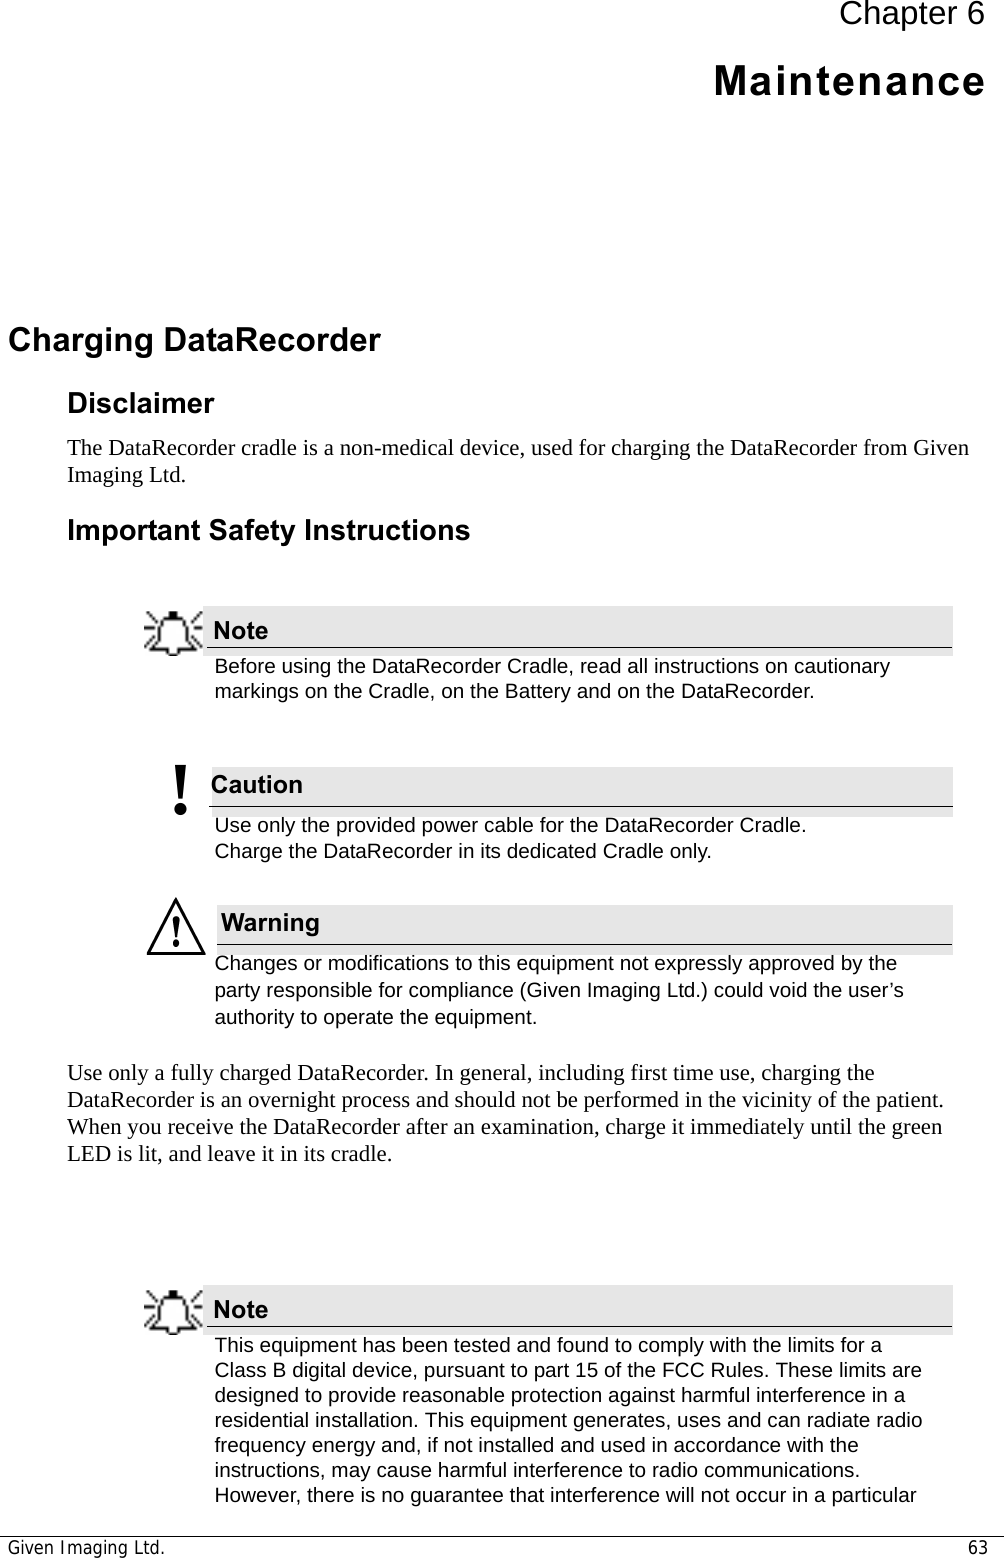 Given Imaging Ltd. 63Chapter 6MaintenanceCharging DataRecorder DisclaimerThe DataRecorder cradle is a non-medical device, used for charging the DataRecorder from Given Imaging Ltd.Important Safety InstructionsNoteBefore using the DataRecorder Cradle, read all instructions on cautionary markings on the Cradle, on the Battery and on the DataRecorder. Caution!Use only the provided power cable for the DataRecorder Cradle. Charge the DataRecorder in its dedicated Cradle only.WarningChanges or modifications to this equipment not expressly approved by the party responsible for compliance (Given Imaging Ltd.) could void the user’s authority to operate the equipment.Use only a fully charged DataRecorder. In general, including first time use, charging the DataRecorder is an overnight process and should not be performed in the vicinity of the patient. When you receive the DataRecorder after an examination, charge it immediately until the green LED is lit, and leave it in its cradle. NoteThis equipment has been tested and found to comply with the limits for a Class B digital device, pursuant to part 15 of the FCC Rules. These limits are designed to provide reasonable protection against harmful interference in a residential installation. This equipment generates, uses and can radiate radio frequency energy and, if not installed and used in accordance with the instructions, may cause harmful interference to radio communications. However, there is no guarantee that interference will not occur in a particular 